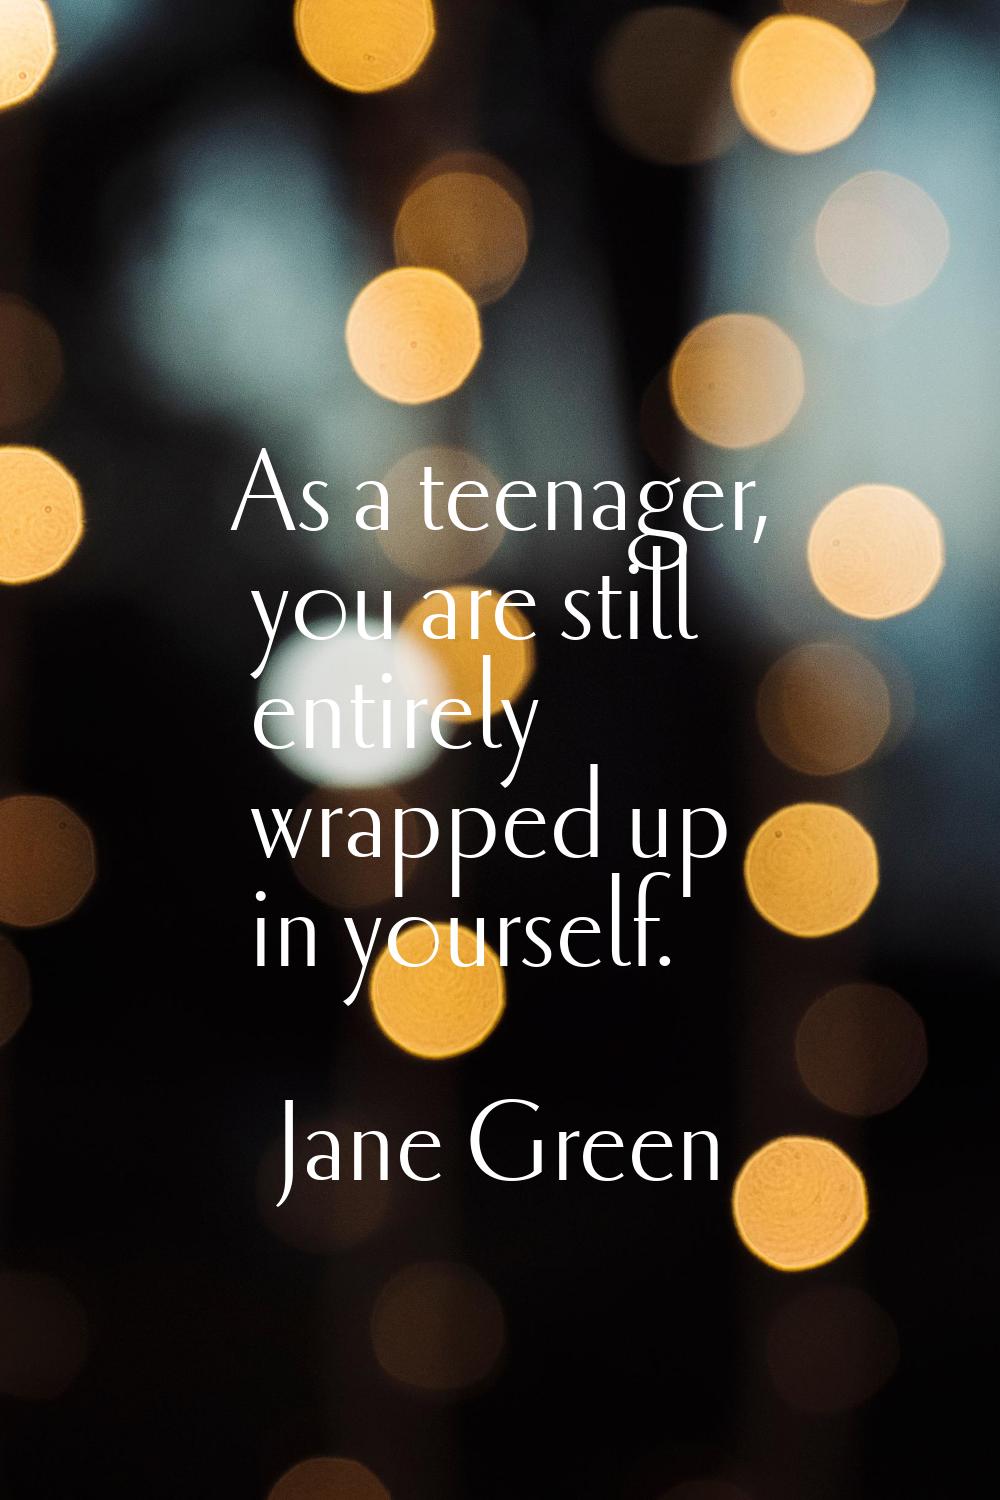 As a teenager, you are still entirely wrapped up in yourself.